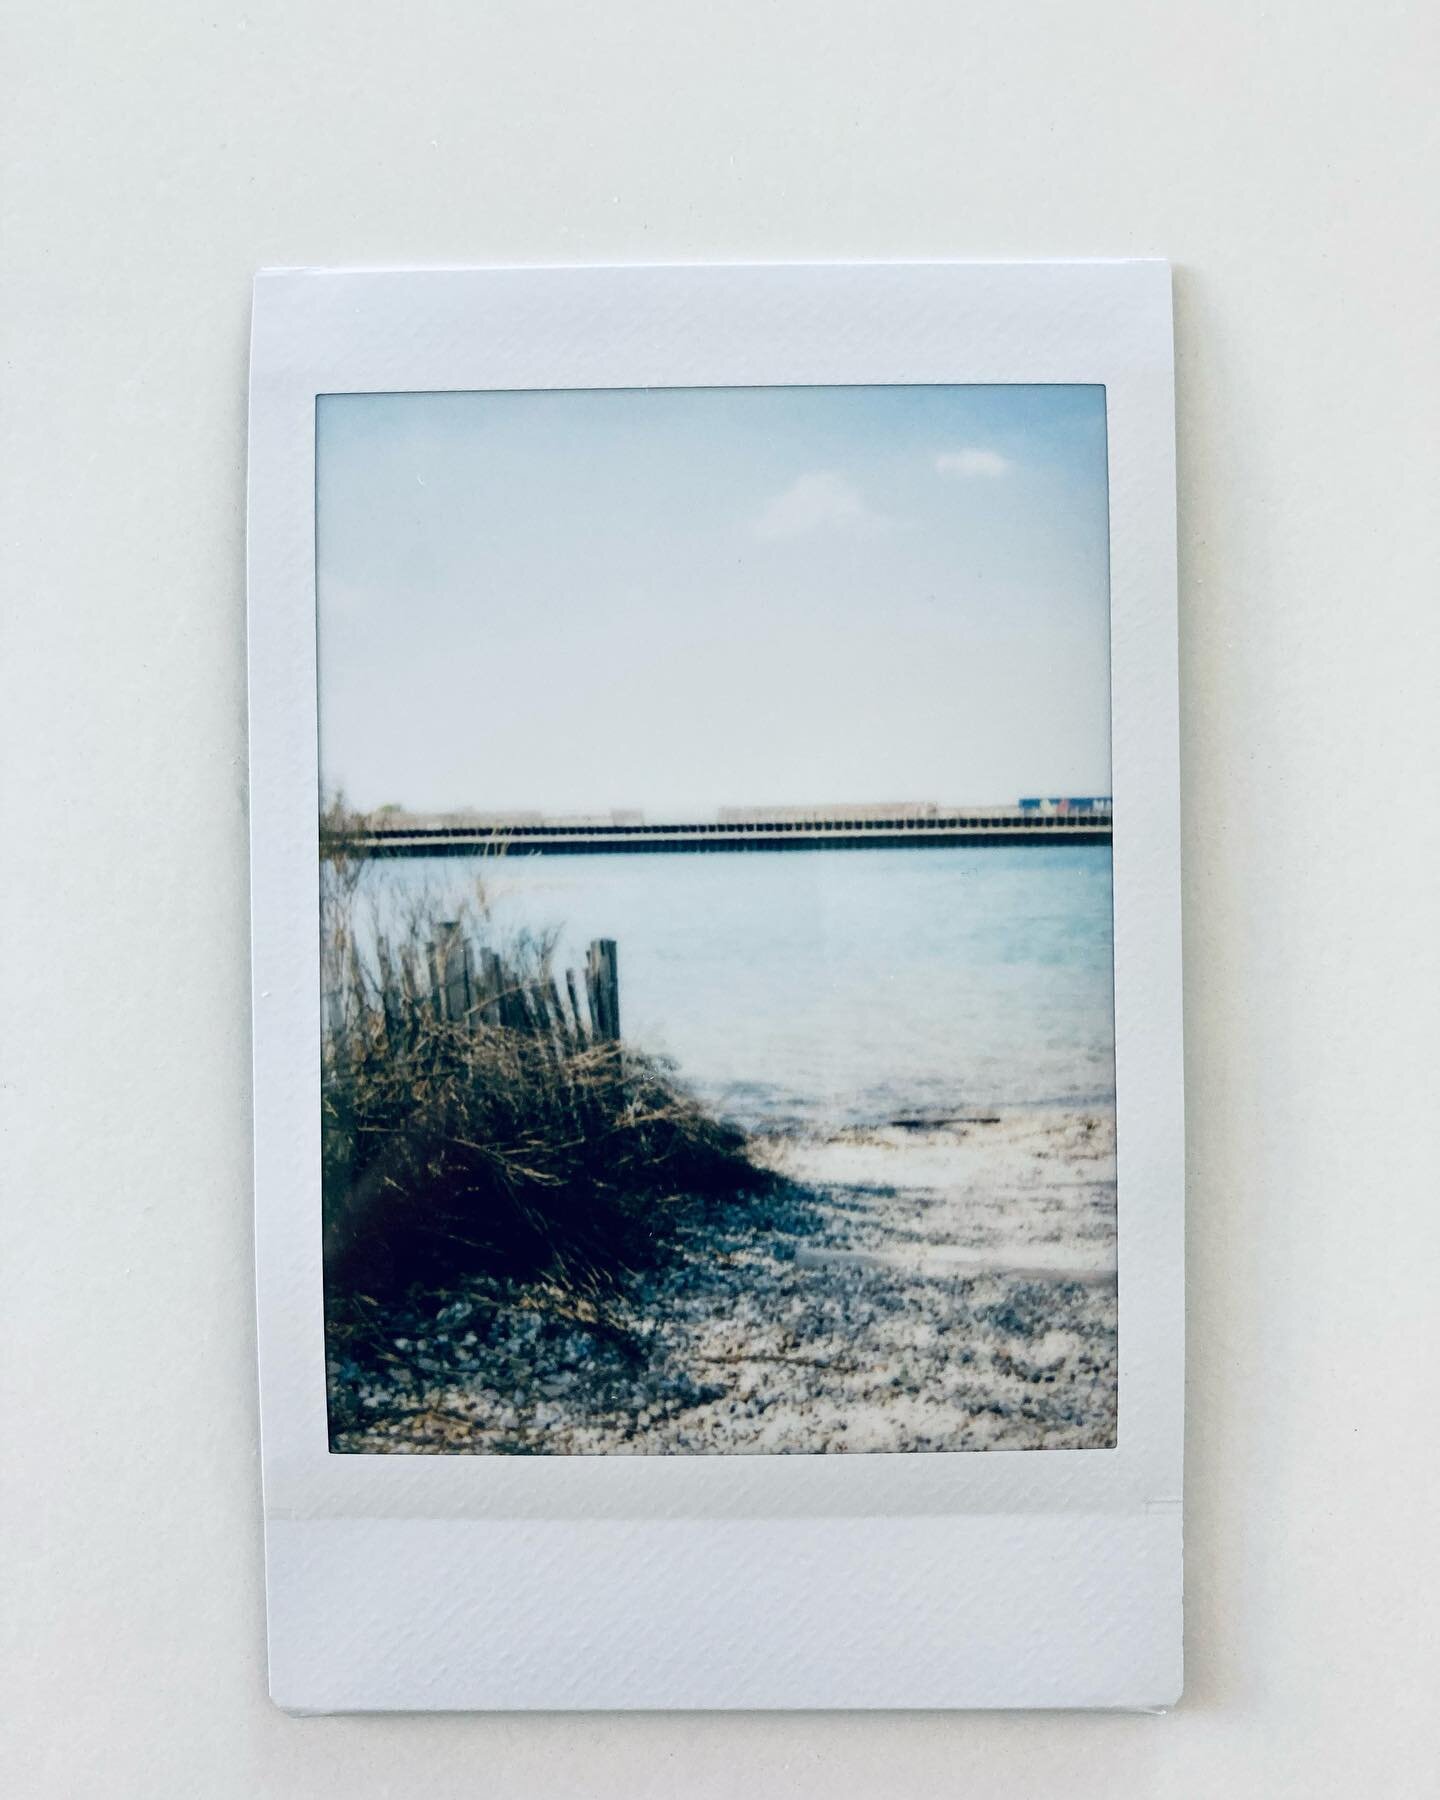 From today&rsquo;s walk around the lake. 

The second image is two of Liam&rsquo;s photos. He&rsquo;s got such a good eye for a 7yo! 📷 (I prefer his photos over mine. 😆)

#buddingphotographer #instaxmini